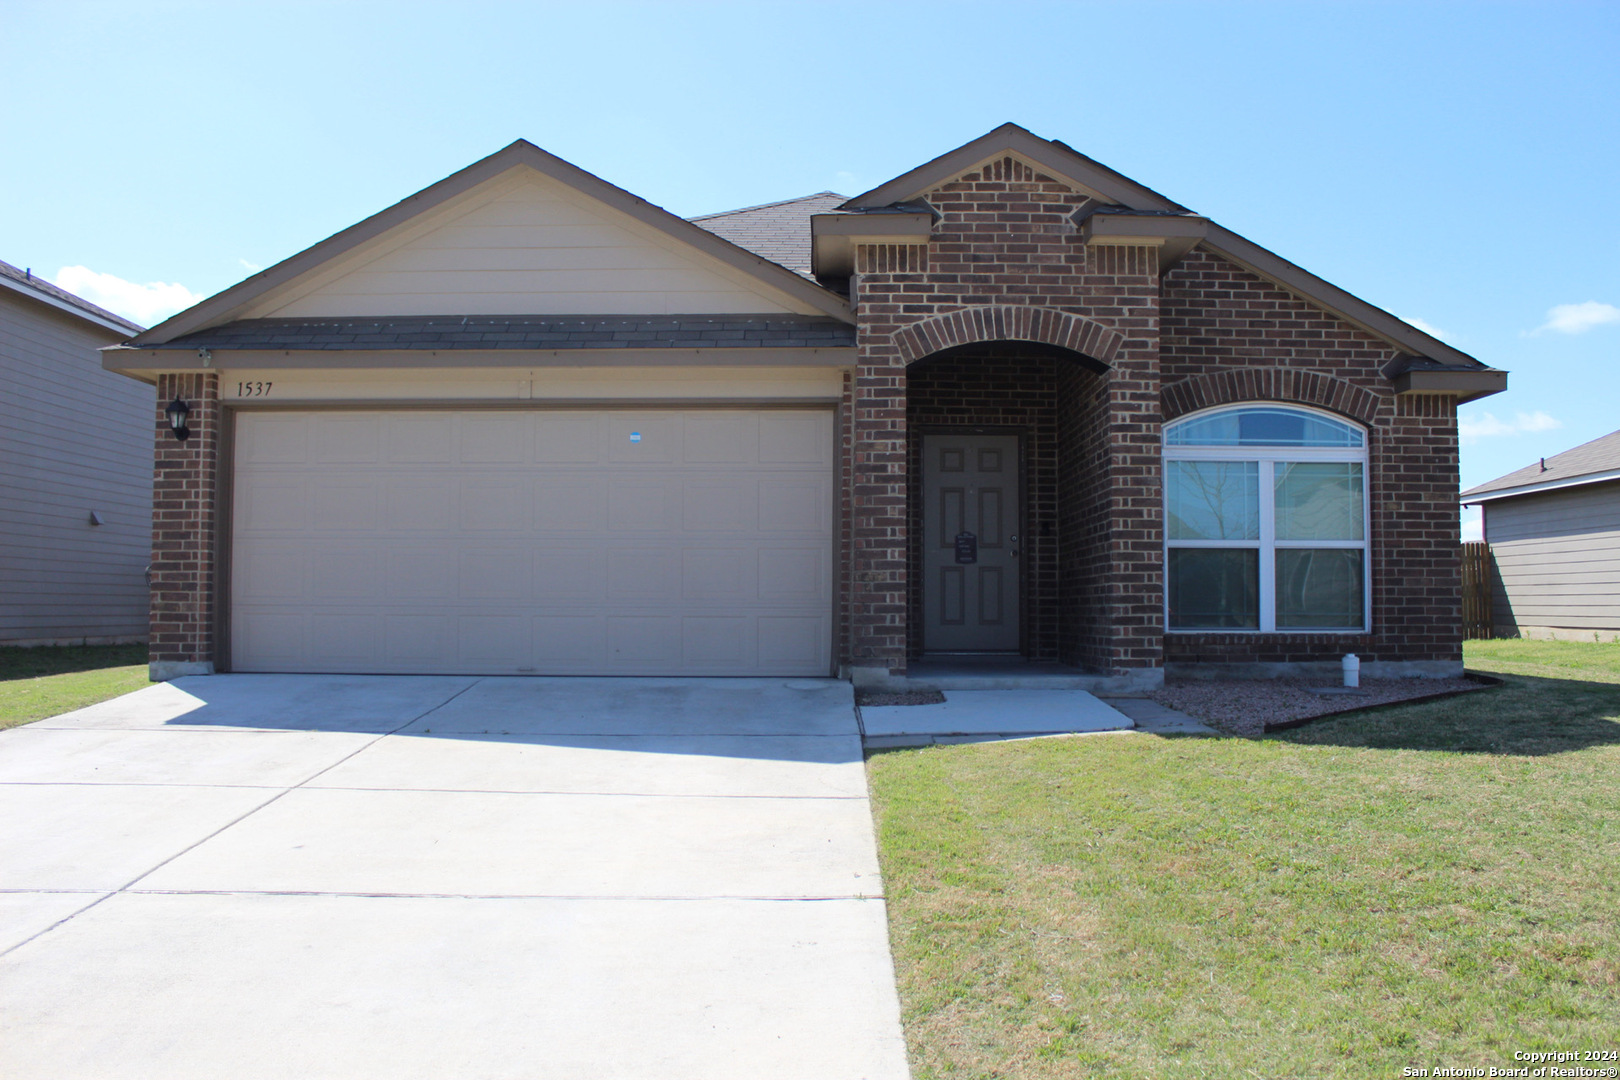 Photo of 1537 Doncaster Dr in Seguin, TX